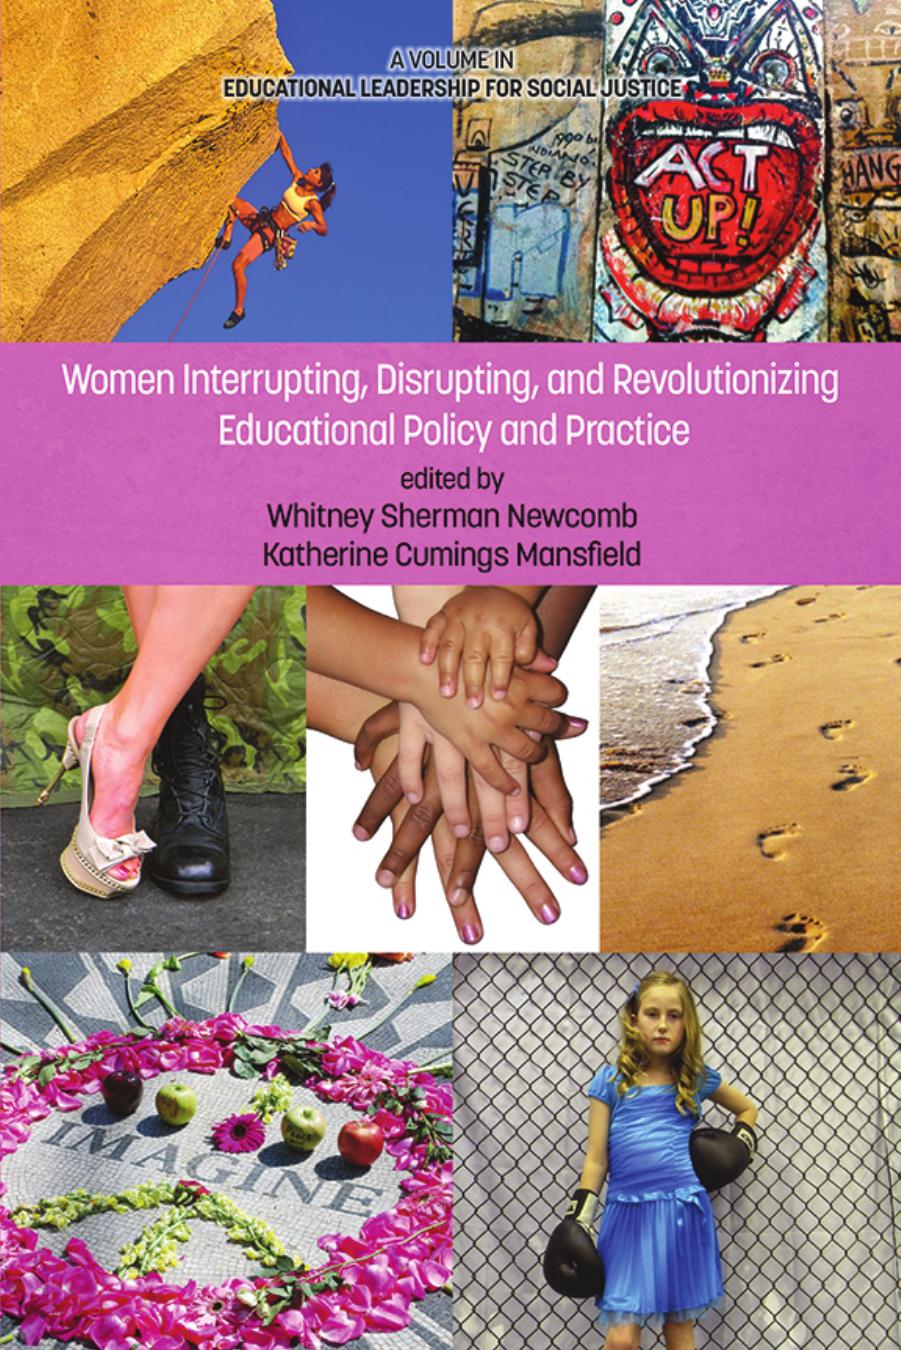 Women Interrupting, Disrupting, and Revolutionizing Educational Policy and Practice by Whitney Sherman Newcomb; Katherine Cumings Mansfield